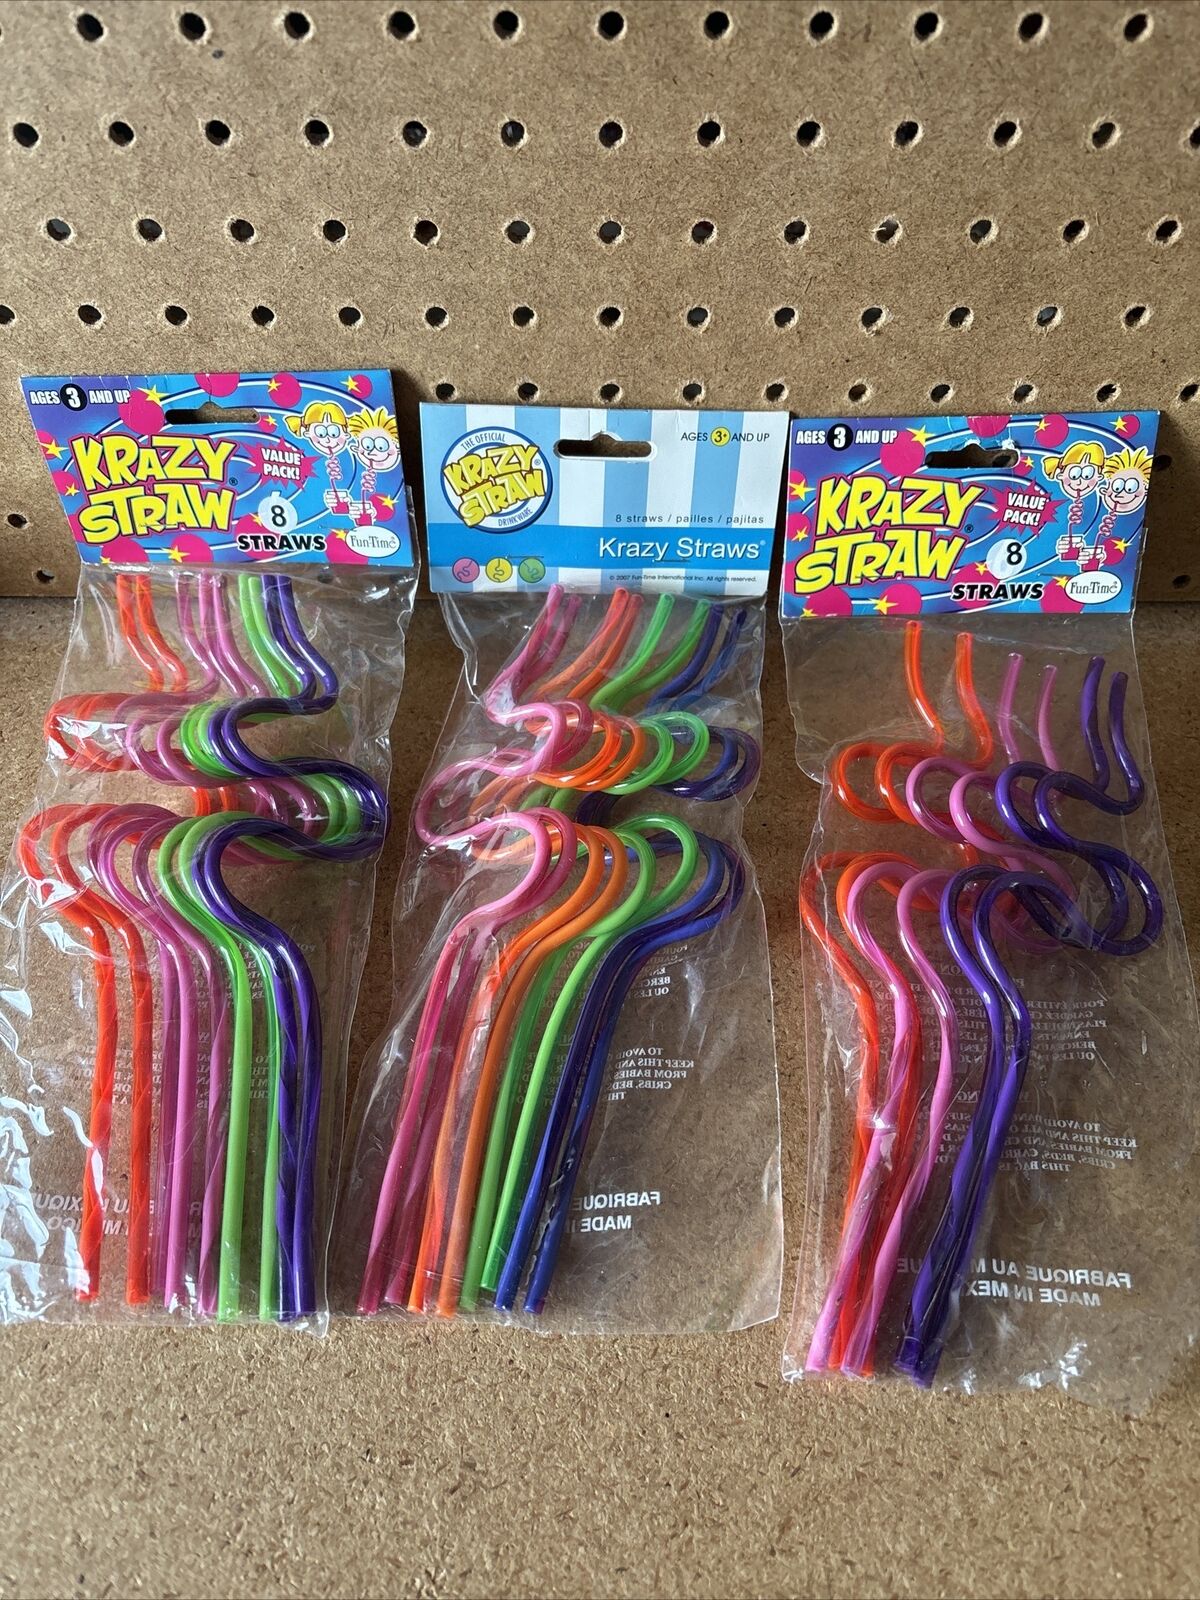 Vintage Krazy Straw Reusable Twirly Straws Curvy 80’s 90s Colorful 22 Total 2880